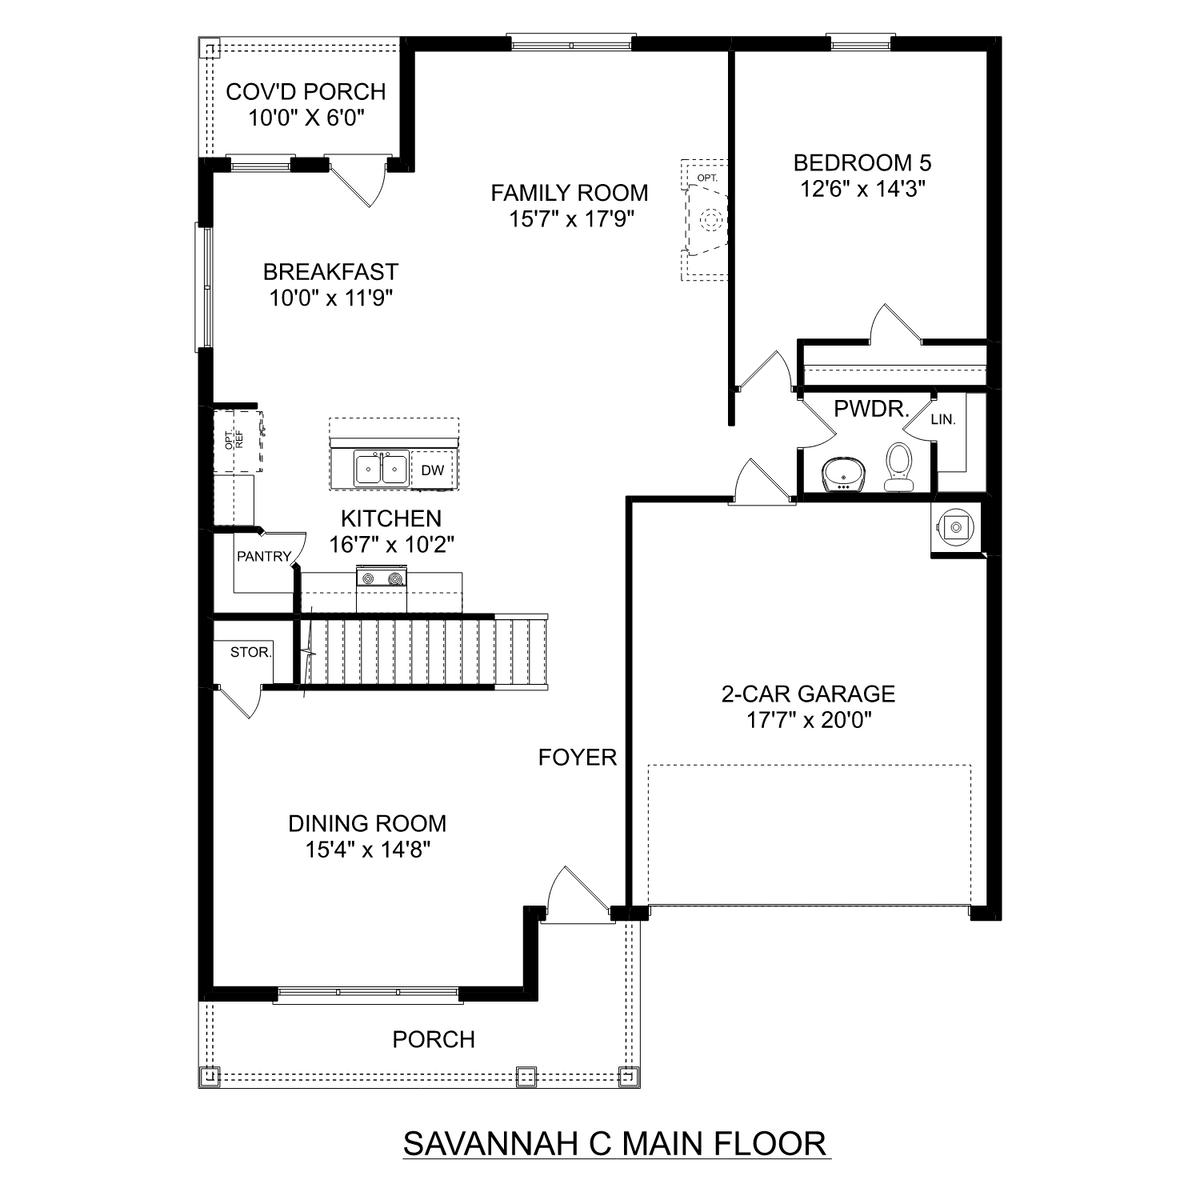 1 - The Savannah C floor plan layout for 169 Cherry Laurel Drive in Davidson Homes' Clearview community.